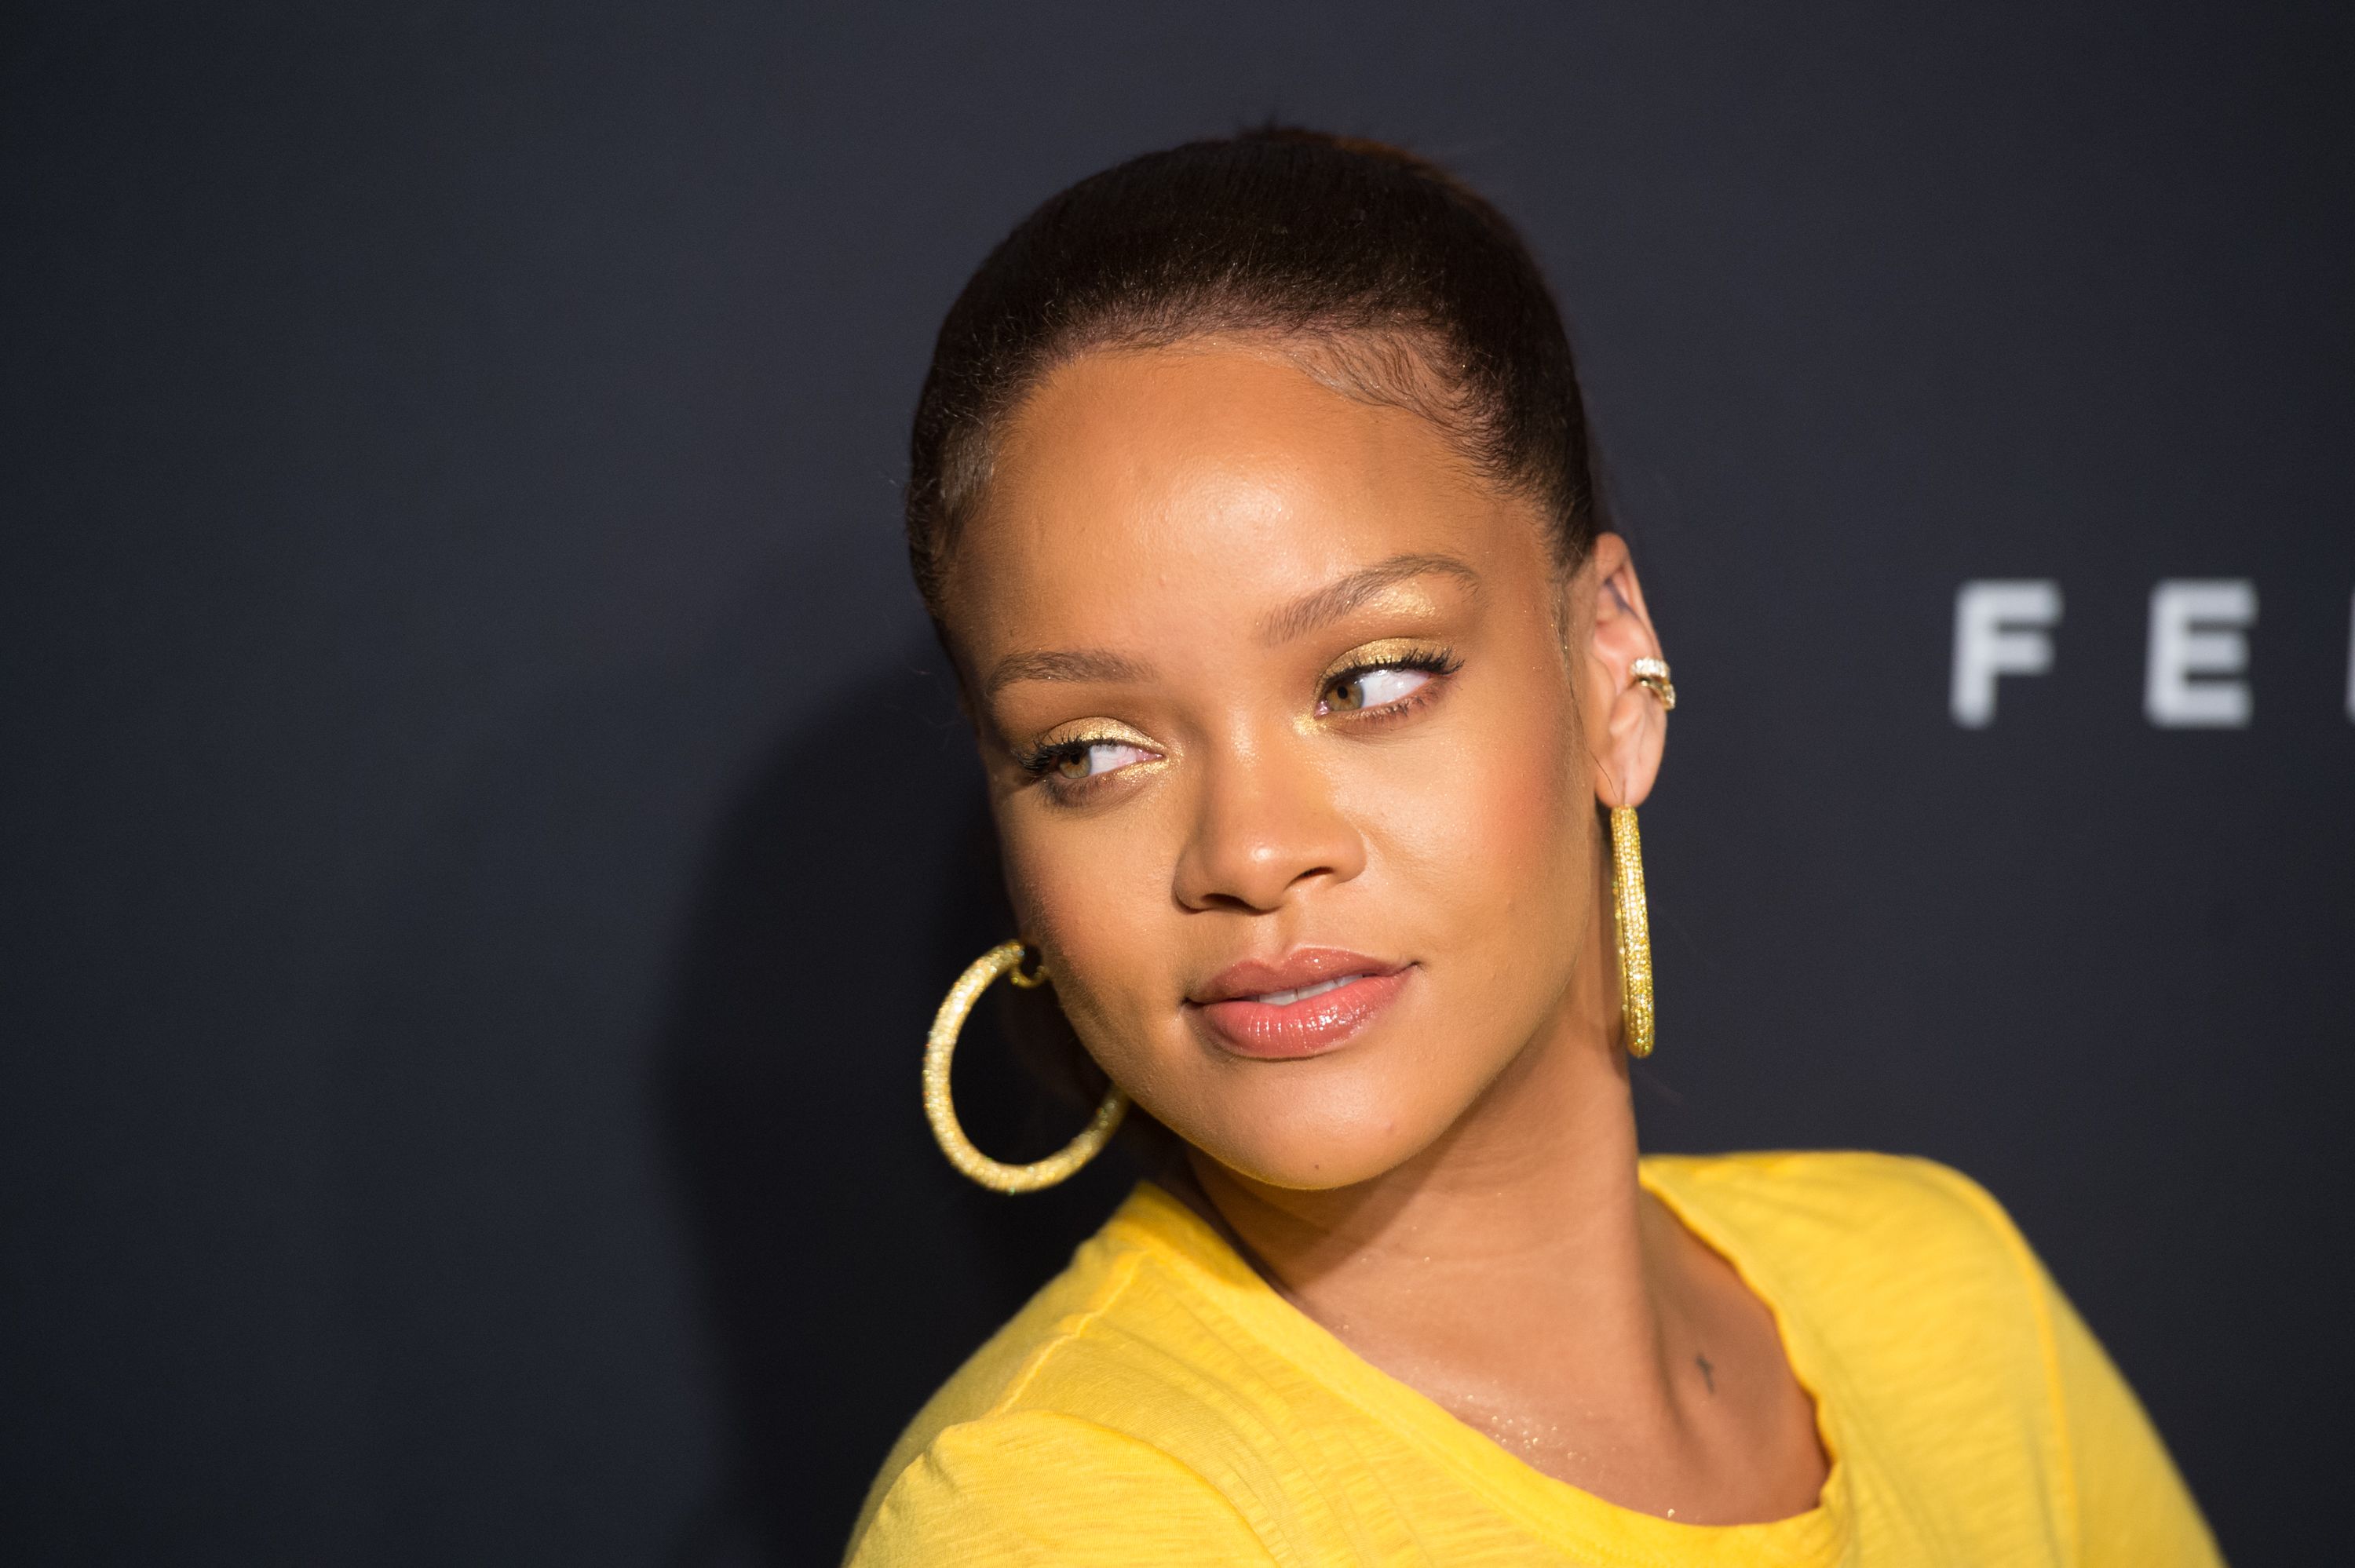 Is the Fenty Beauty foundation a game changer for people of color?